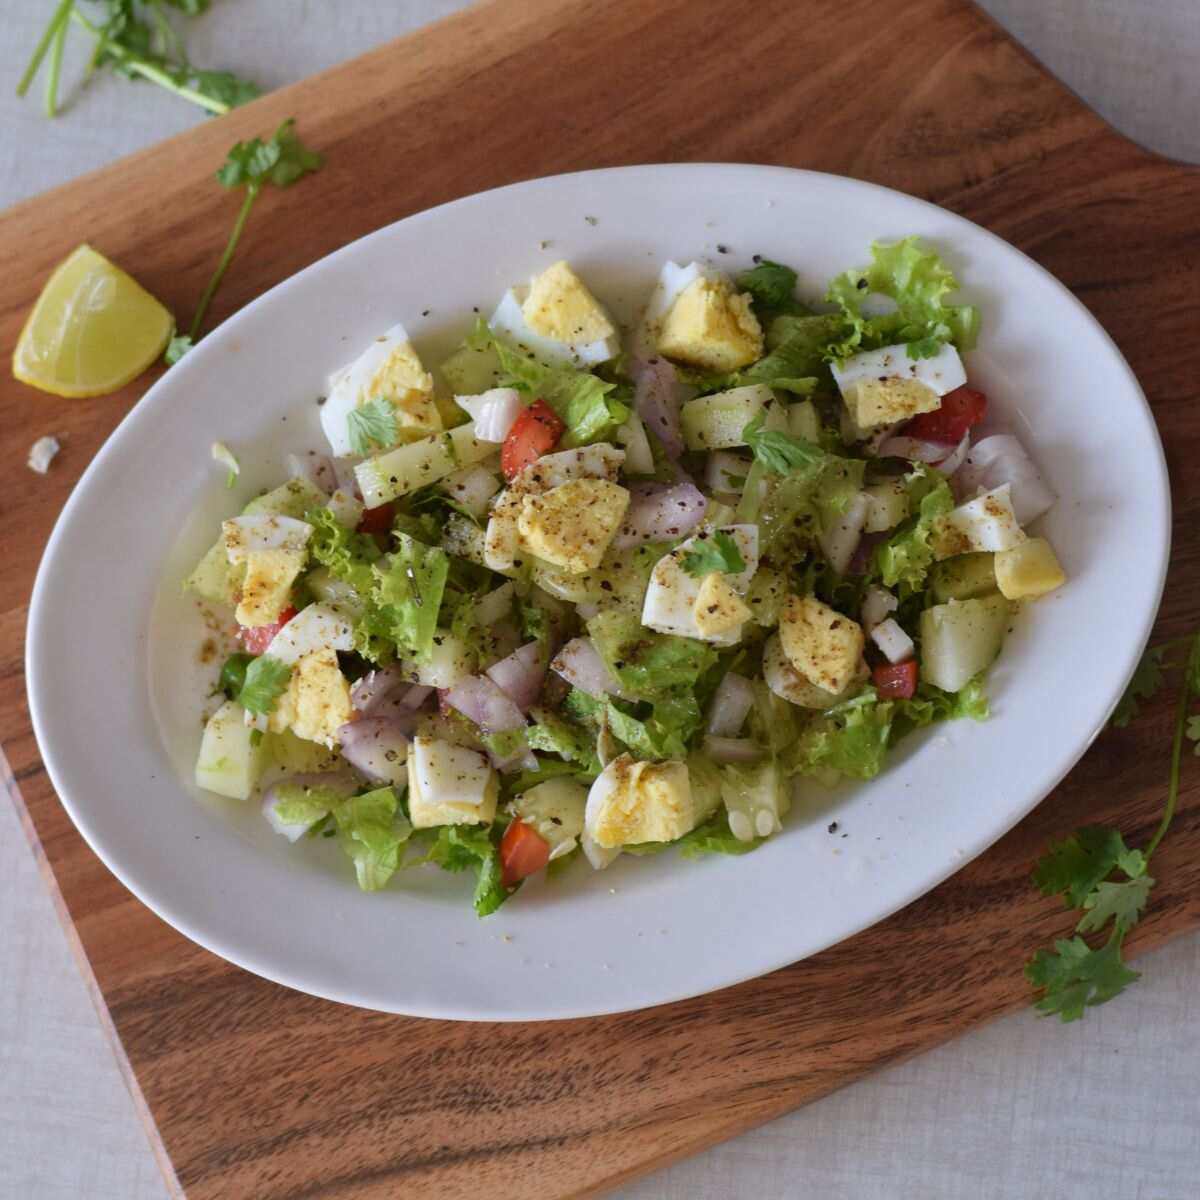 A white oval plate on a wooden cutting board featuring a chefs salad with hard boiled eggs.